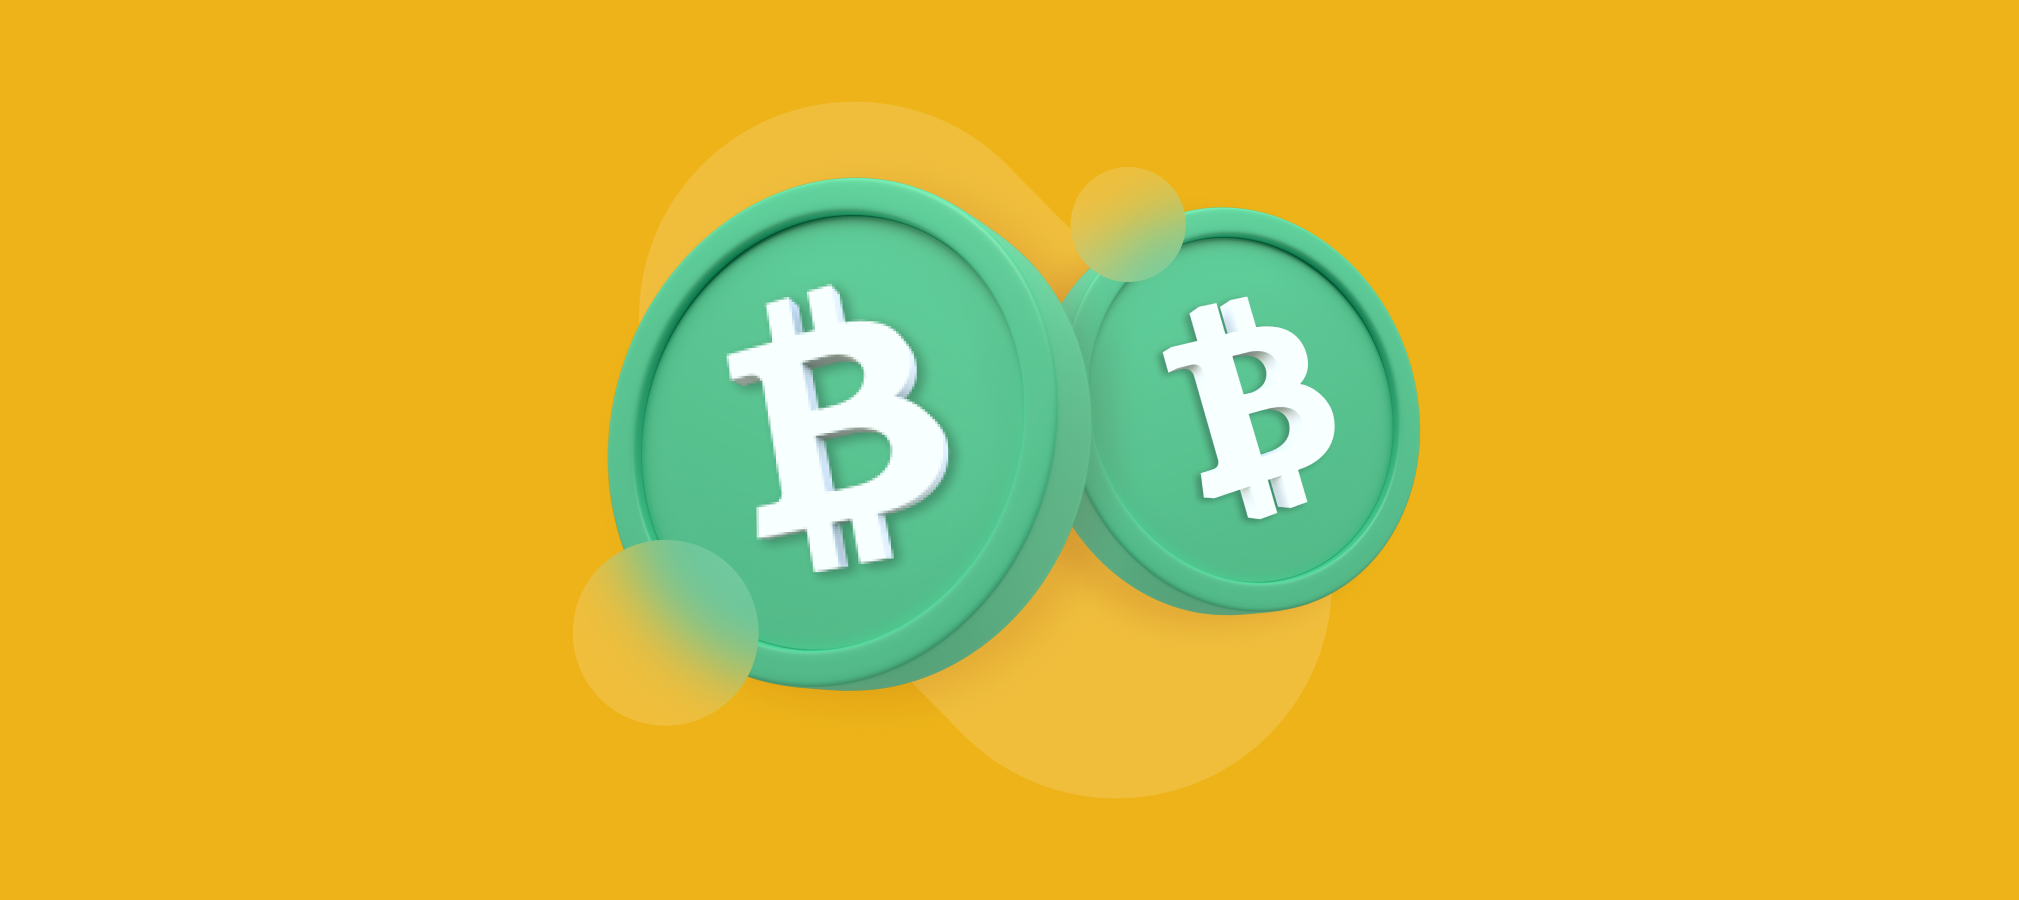 what-is-bitcoin-cash